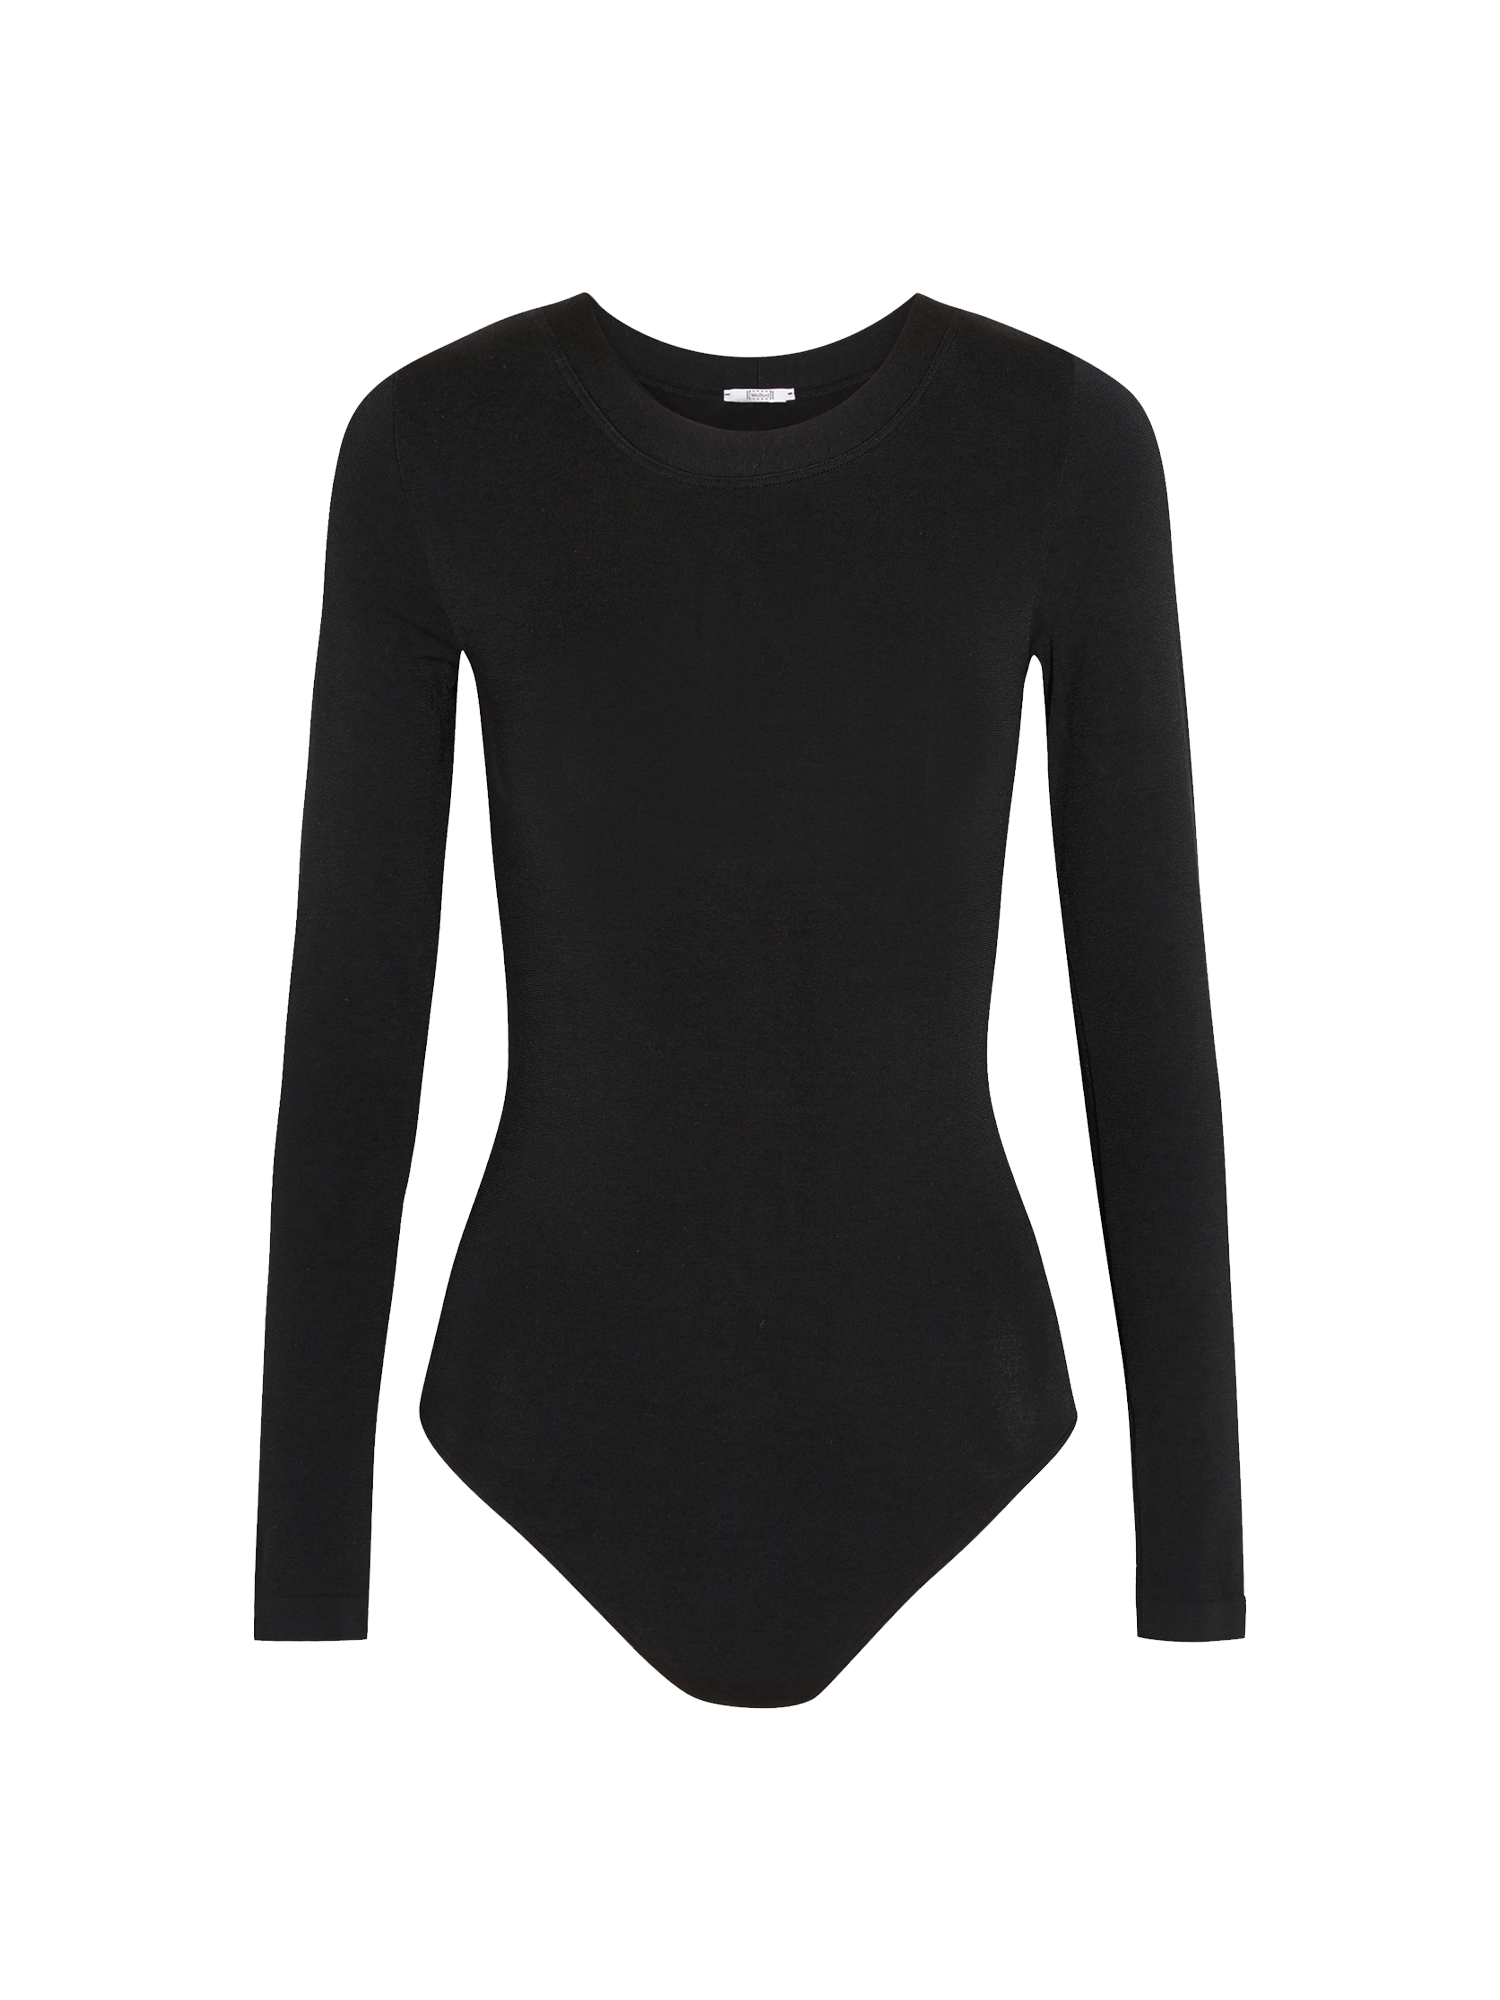 Black Thong Bodysuit by Wolford on Sale